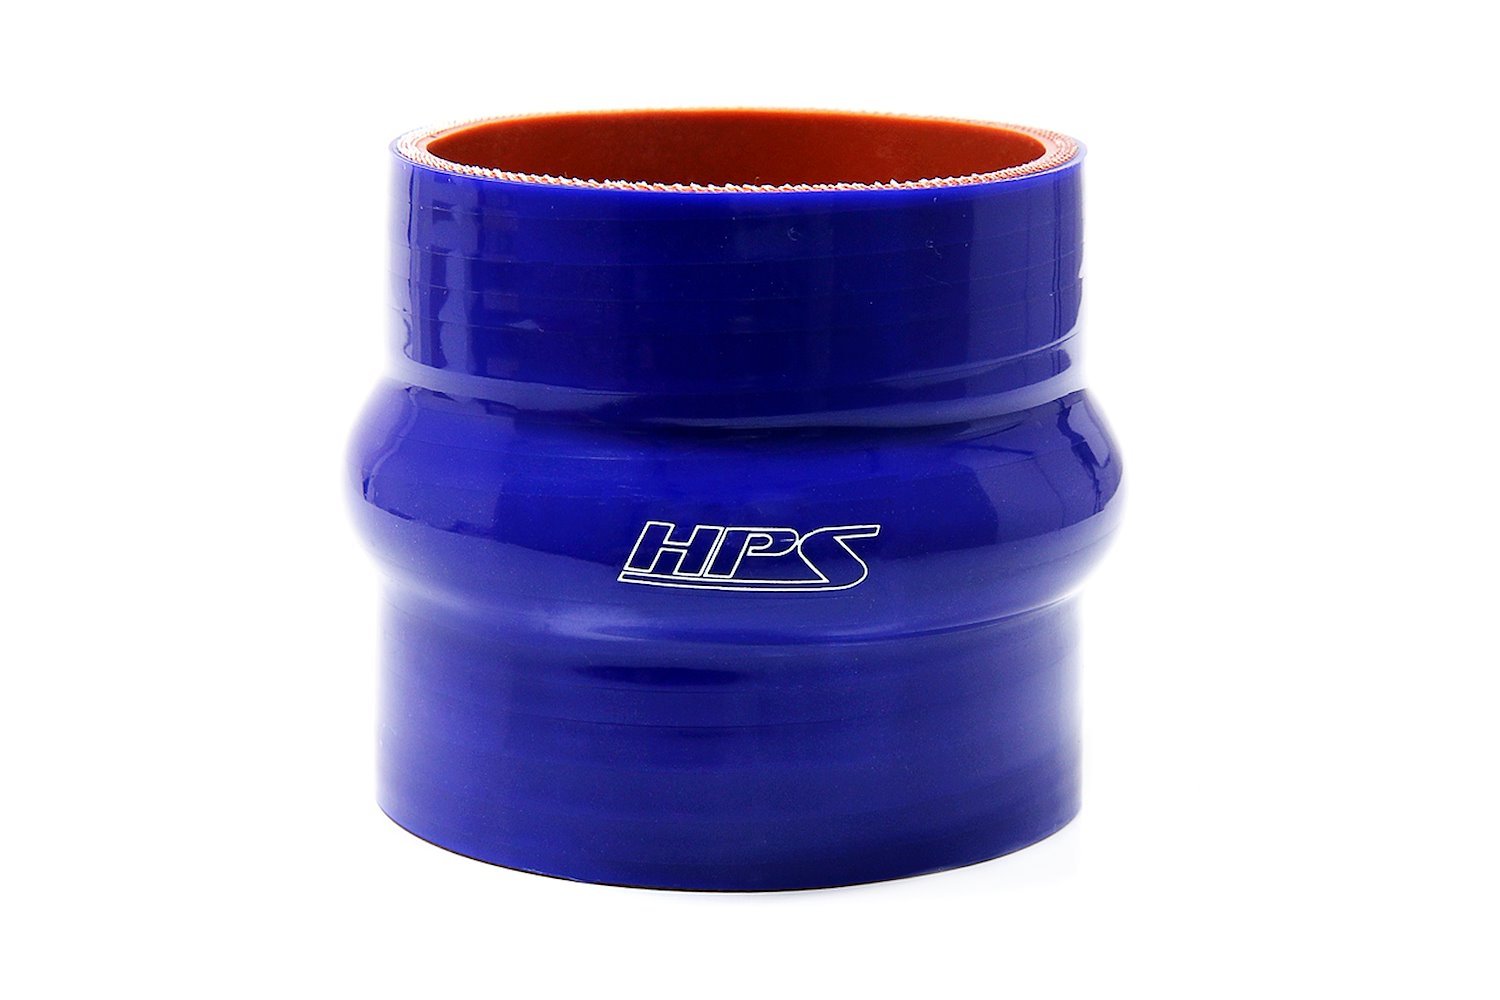 HTSHC-350-BLUE Silicone Hump Coupler Hose, High-Temp 4-Ply Reinforced, 3-1/2 in. ID, 3 in. Long, Blue